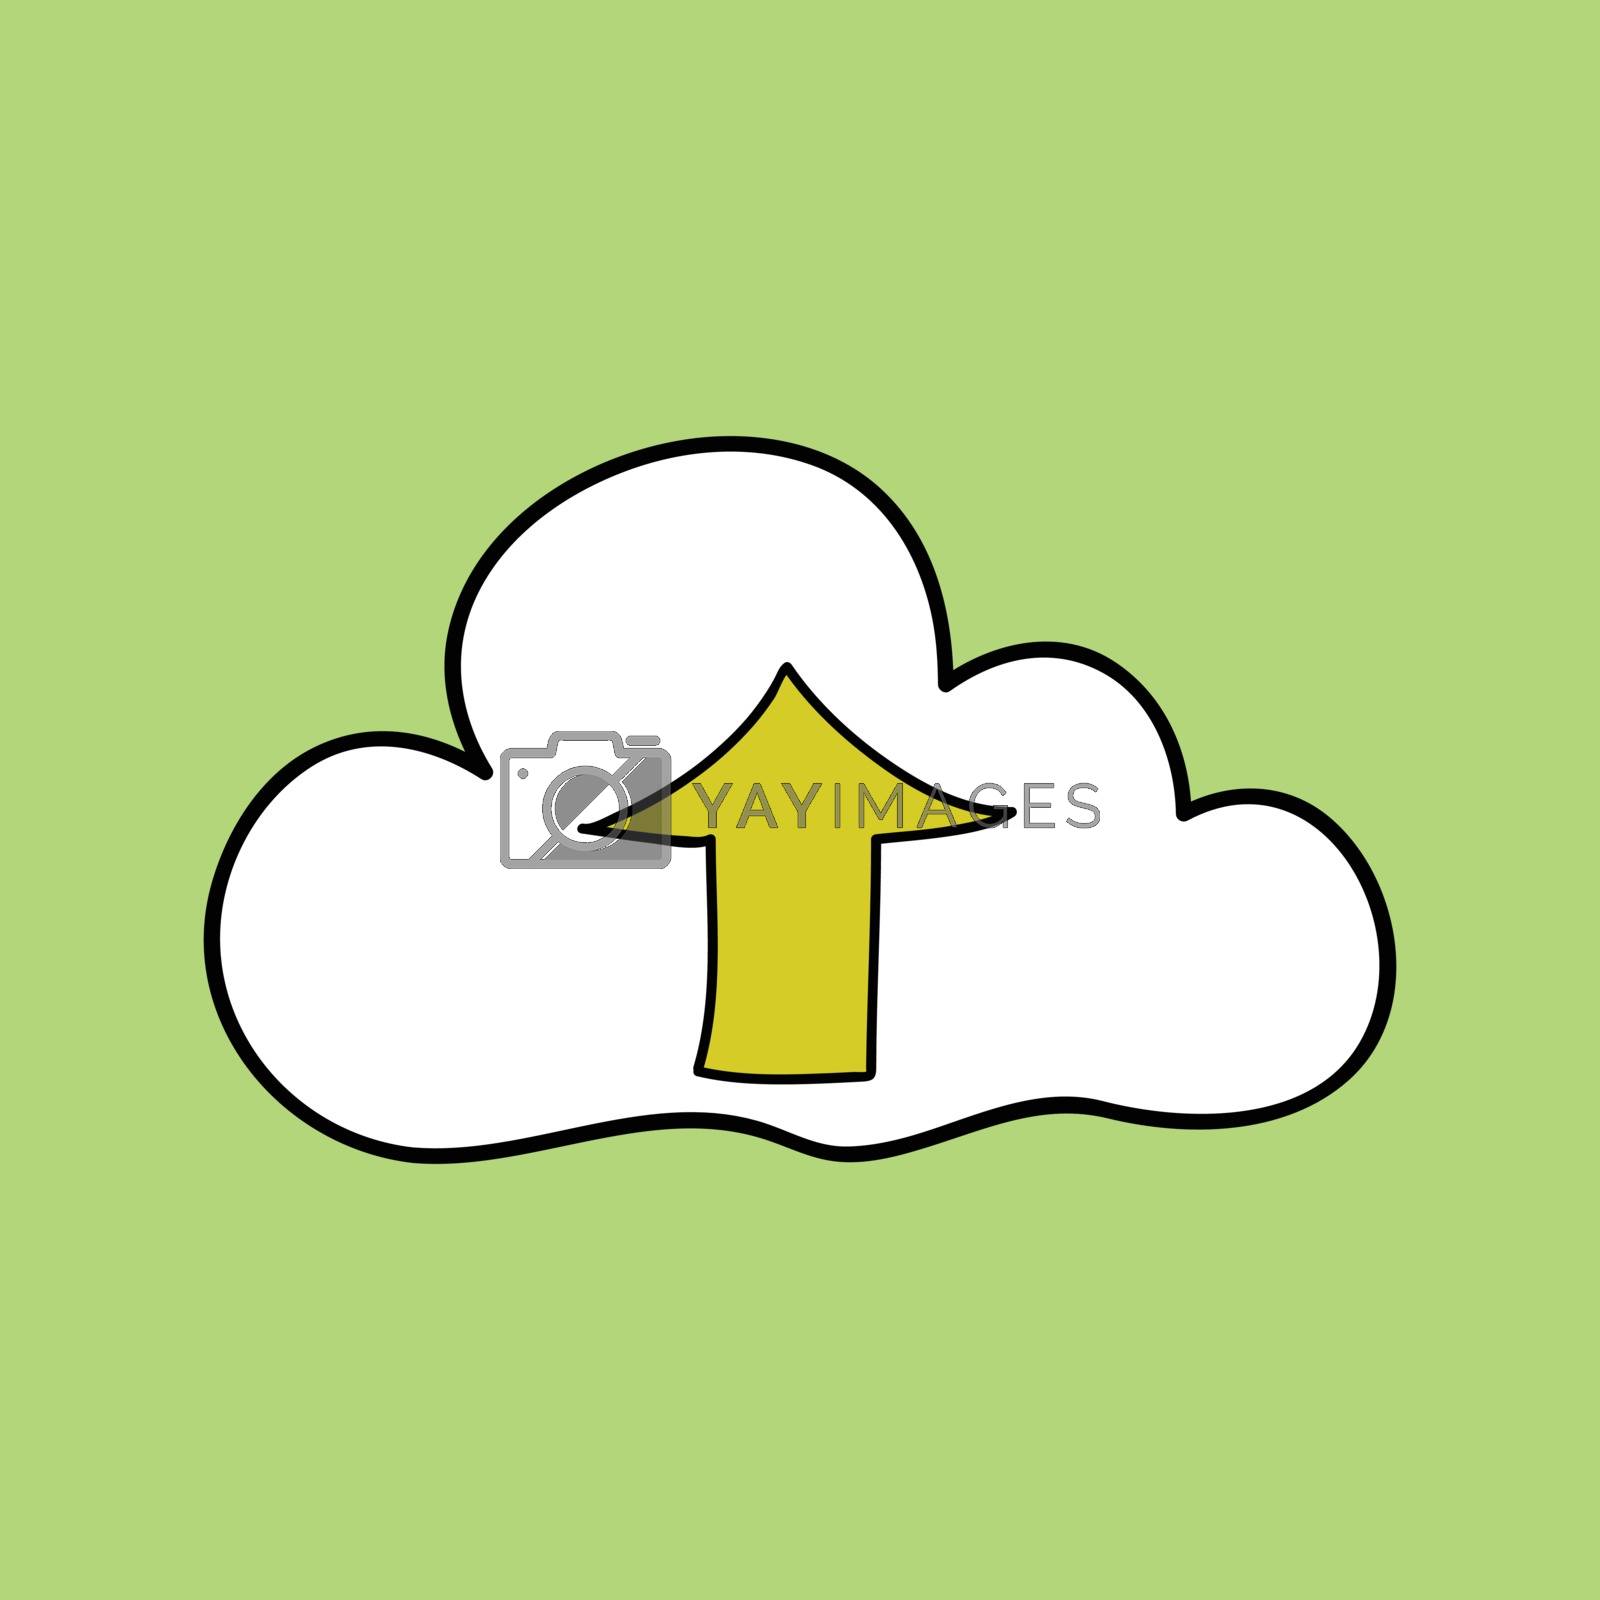 Royalty free image of Doodle style cloud computing by rinika